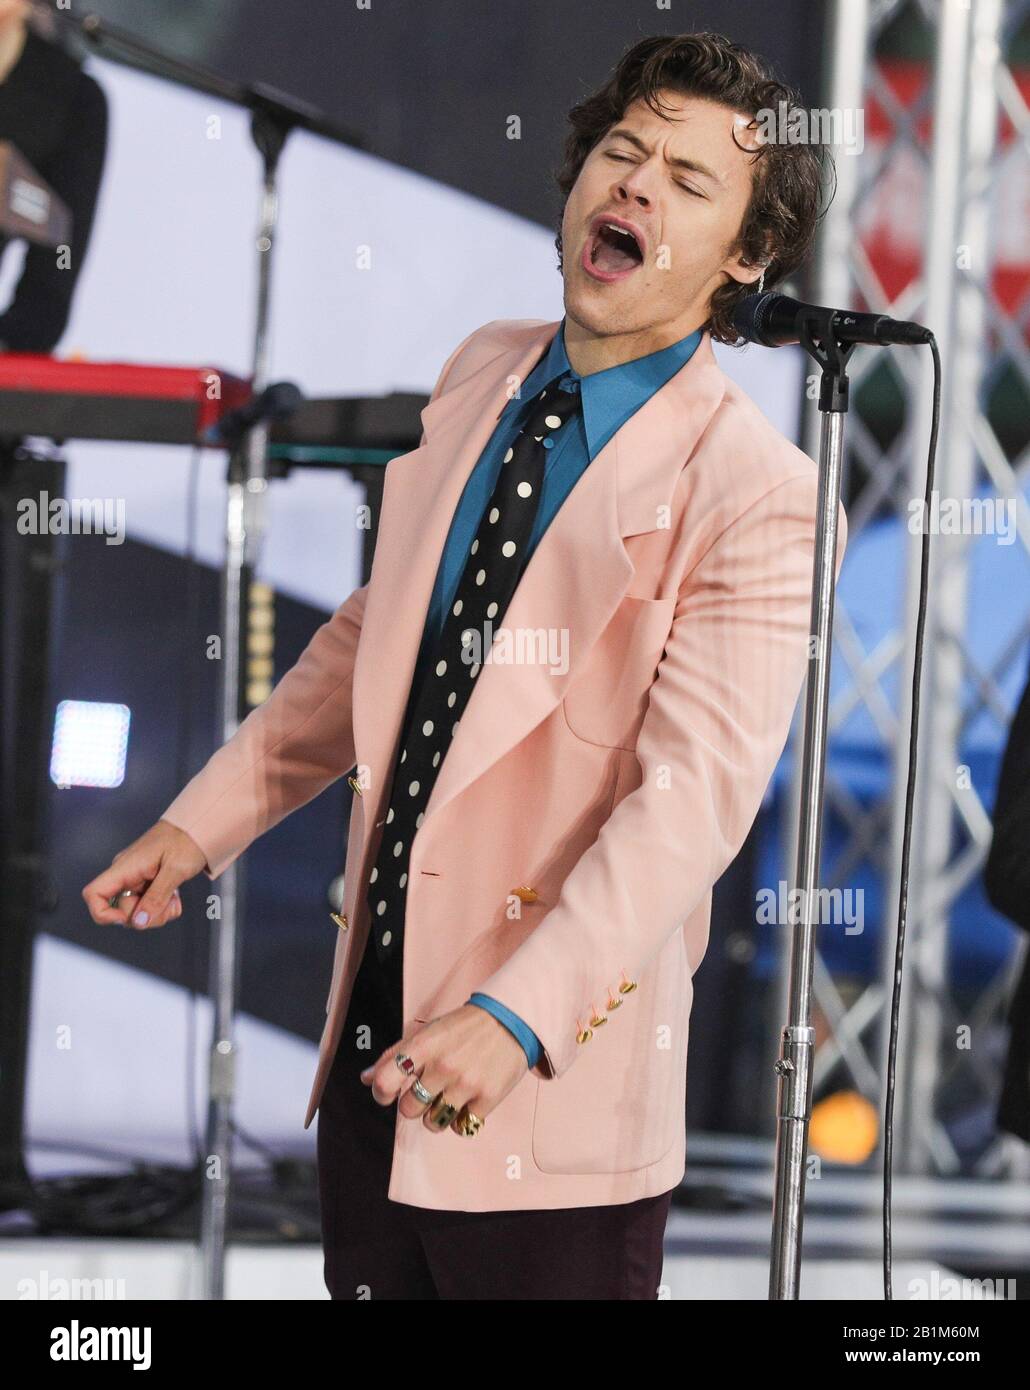 New York, NY, USA. 26th Feb, 2020. Harry Styles on stage for Harry Styles  in Concert on the NBC Today Show, Rockefeller Center Today Show Plaza, New  York, NY February 26, 2020.